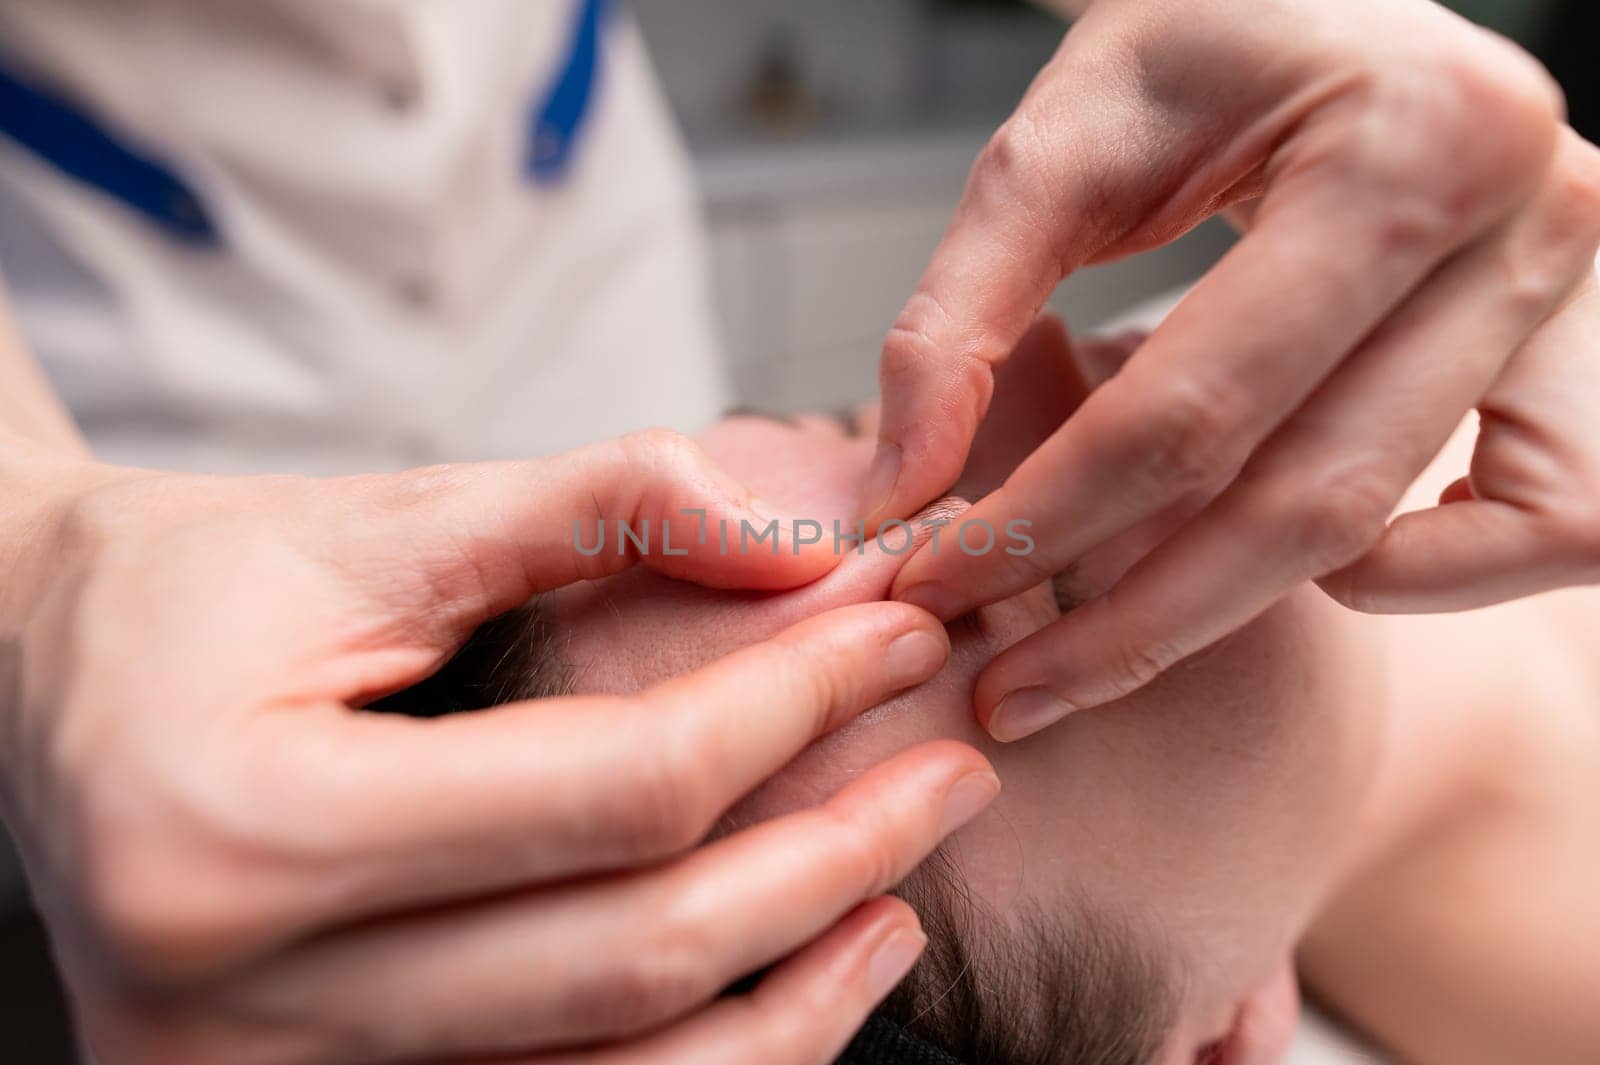 Close-up shot of a woman's head doing a facial massage on a treatment table. Therapist applying pressure with thumbs on forehead.